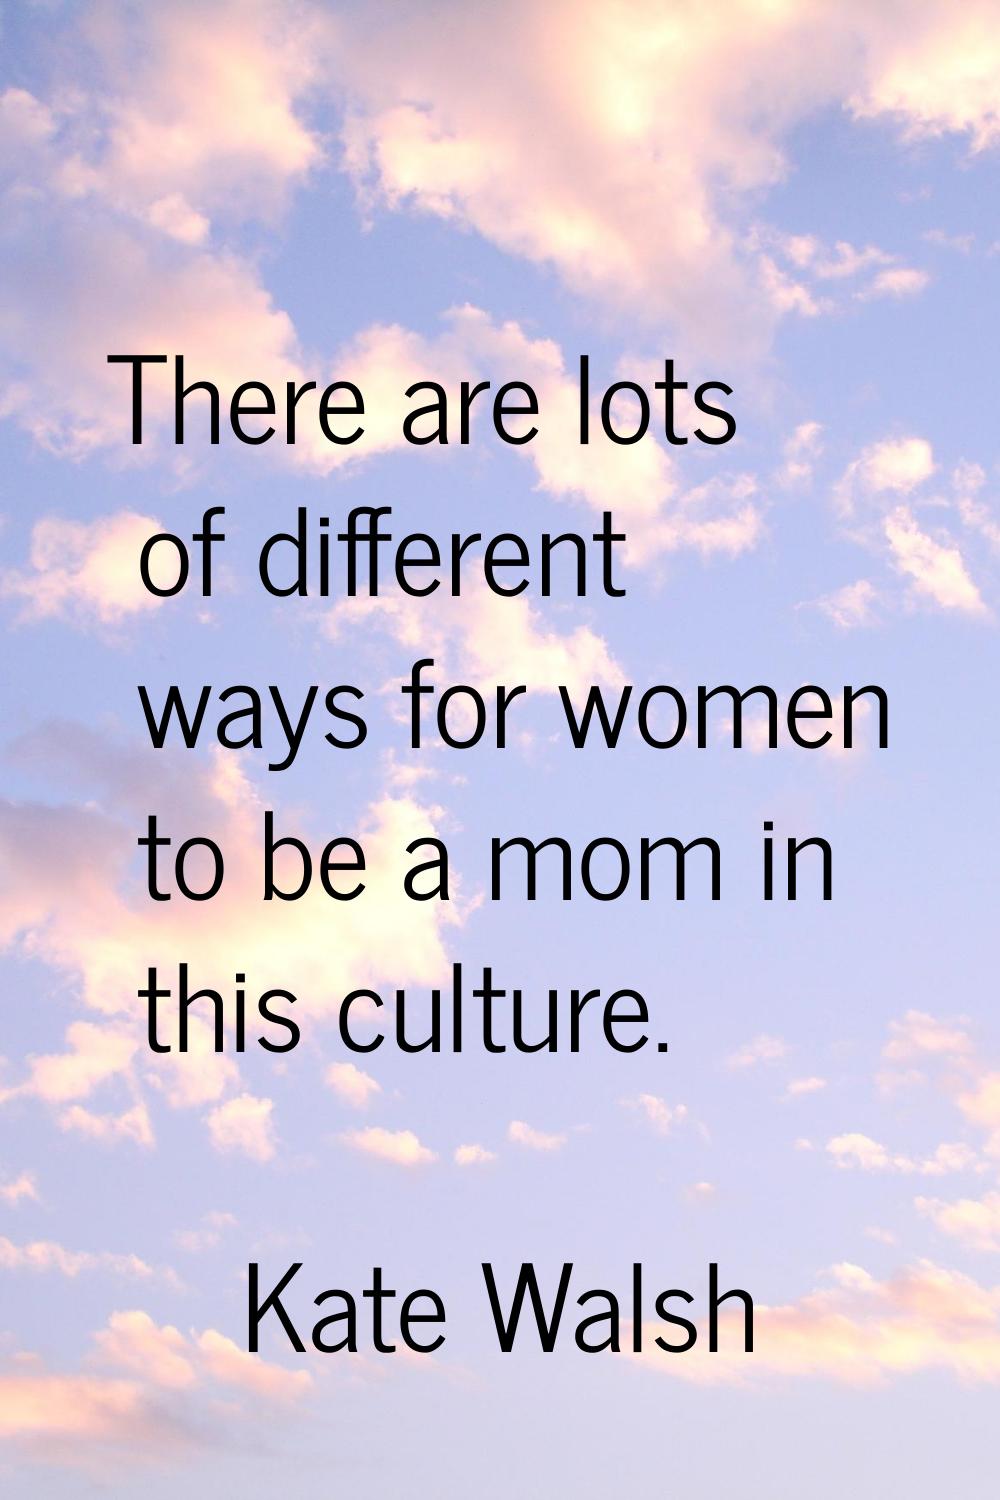 There are lots of different ways for women to be a mom in this culture.